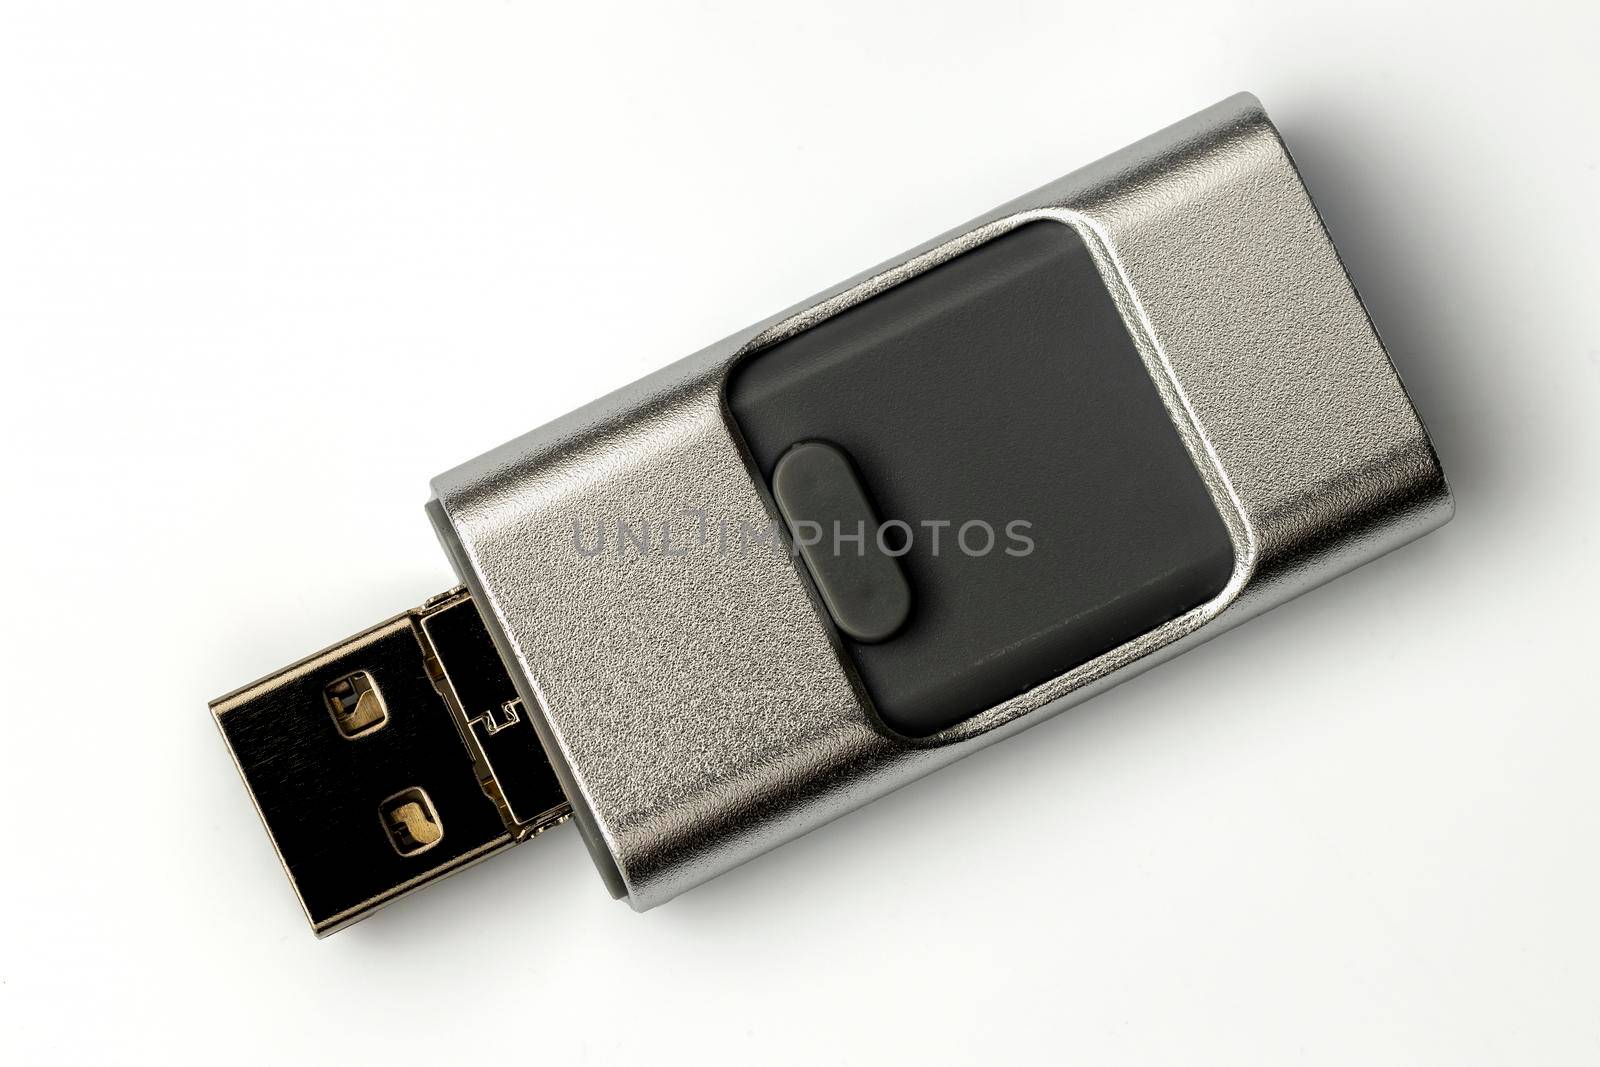 device for transferring data from iphone to computer by but_photo